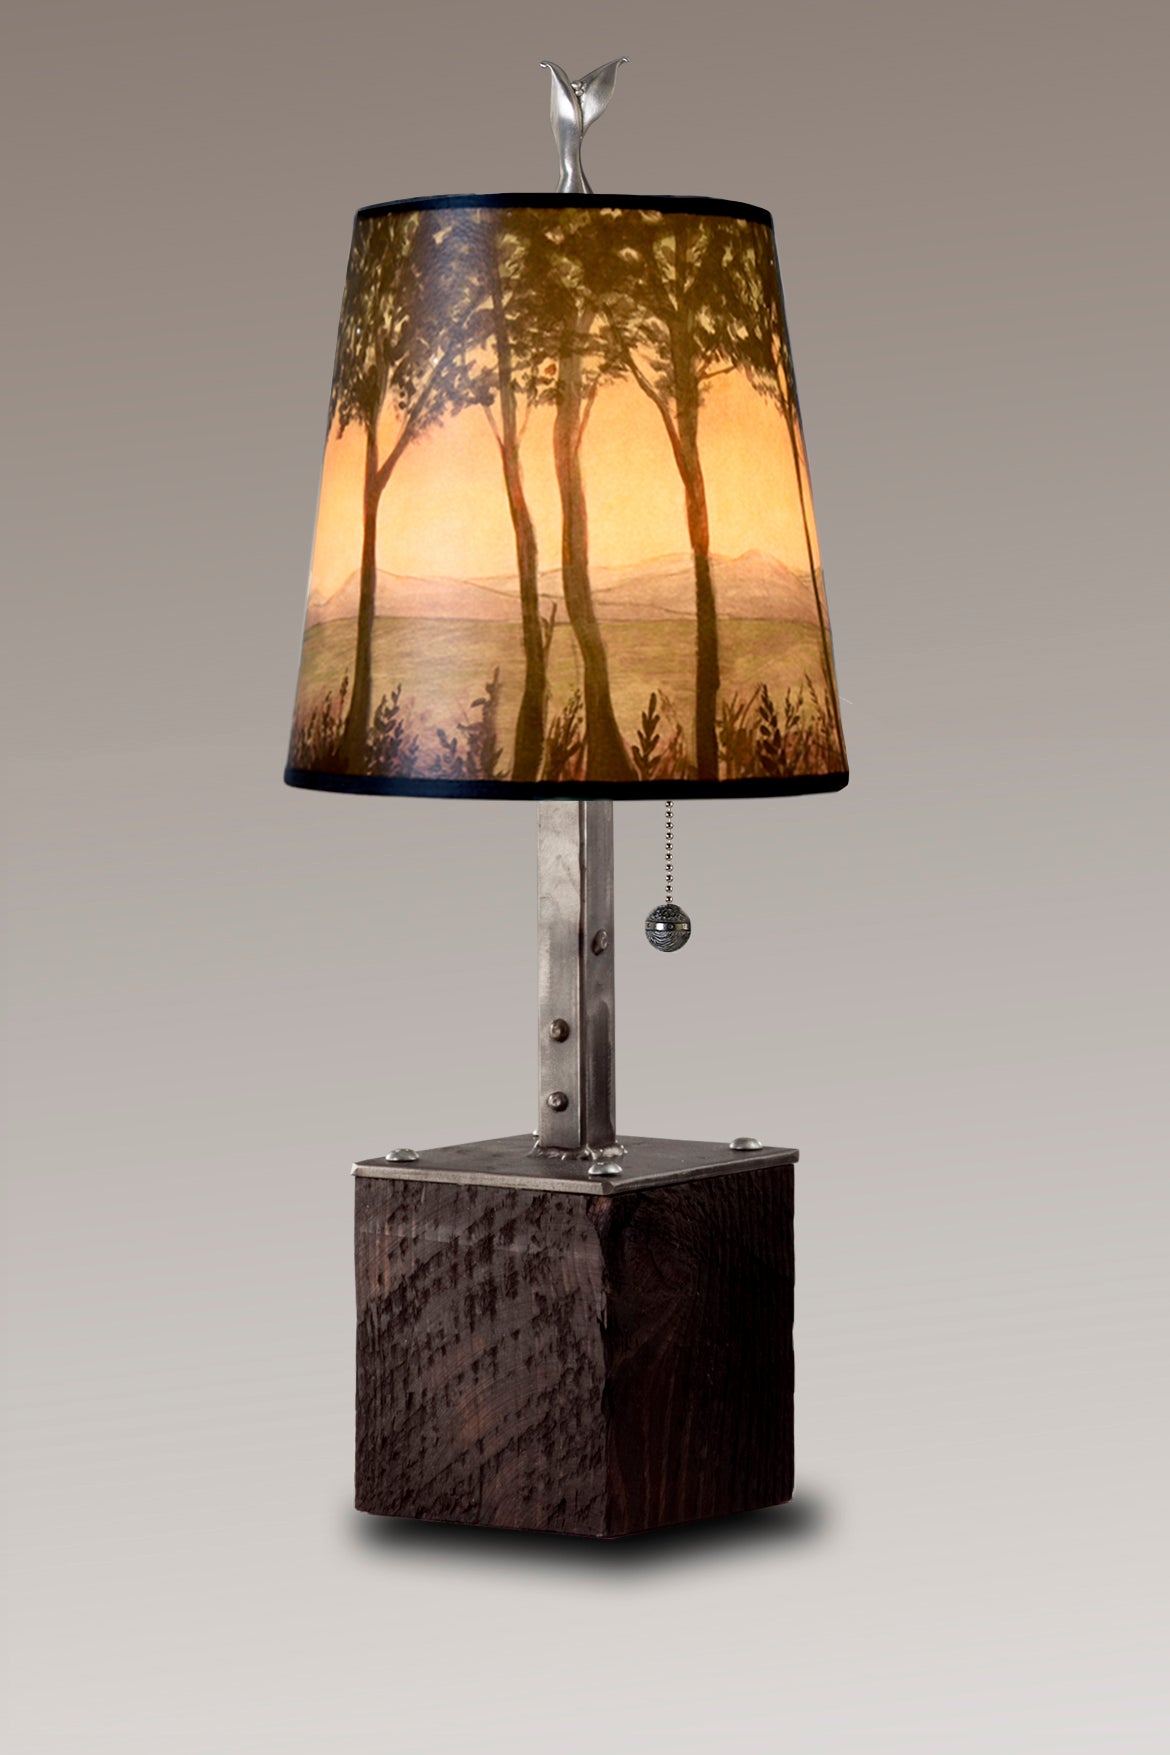 Steel Table Lamp on Reclaimed Wood with Small Drum Shade in Dawn